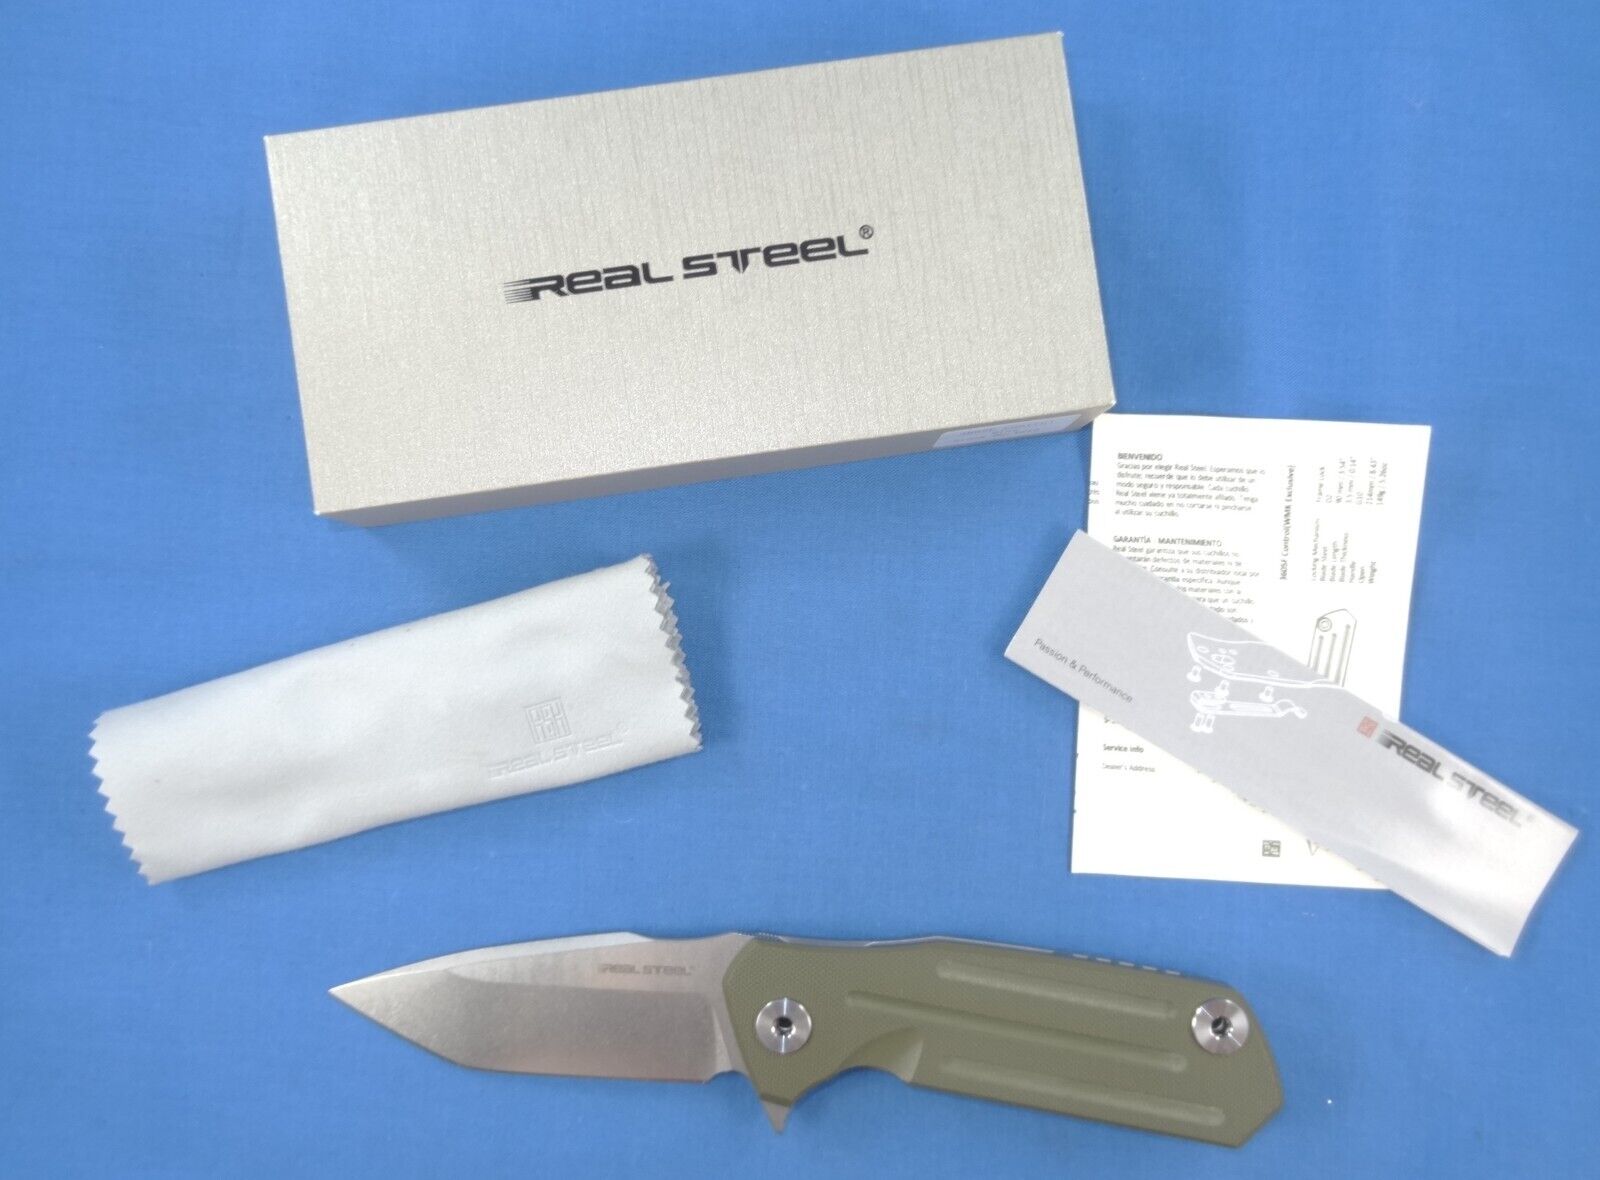 WMK EXC.REAL STEEL 3605F CONTROL FLIPPER KNIFE GREEN G10 & STAINLESS  *REDUCED*